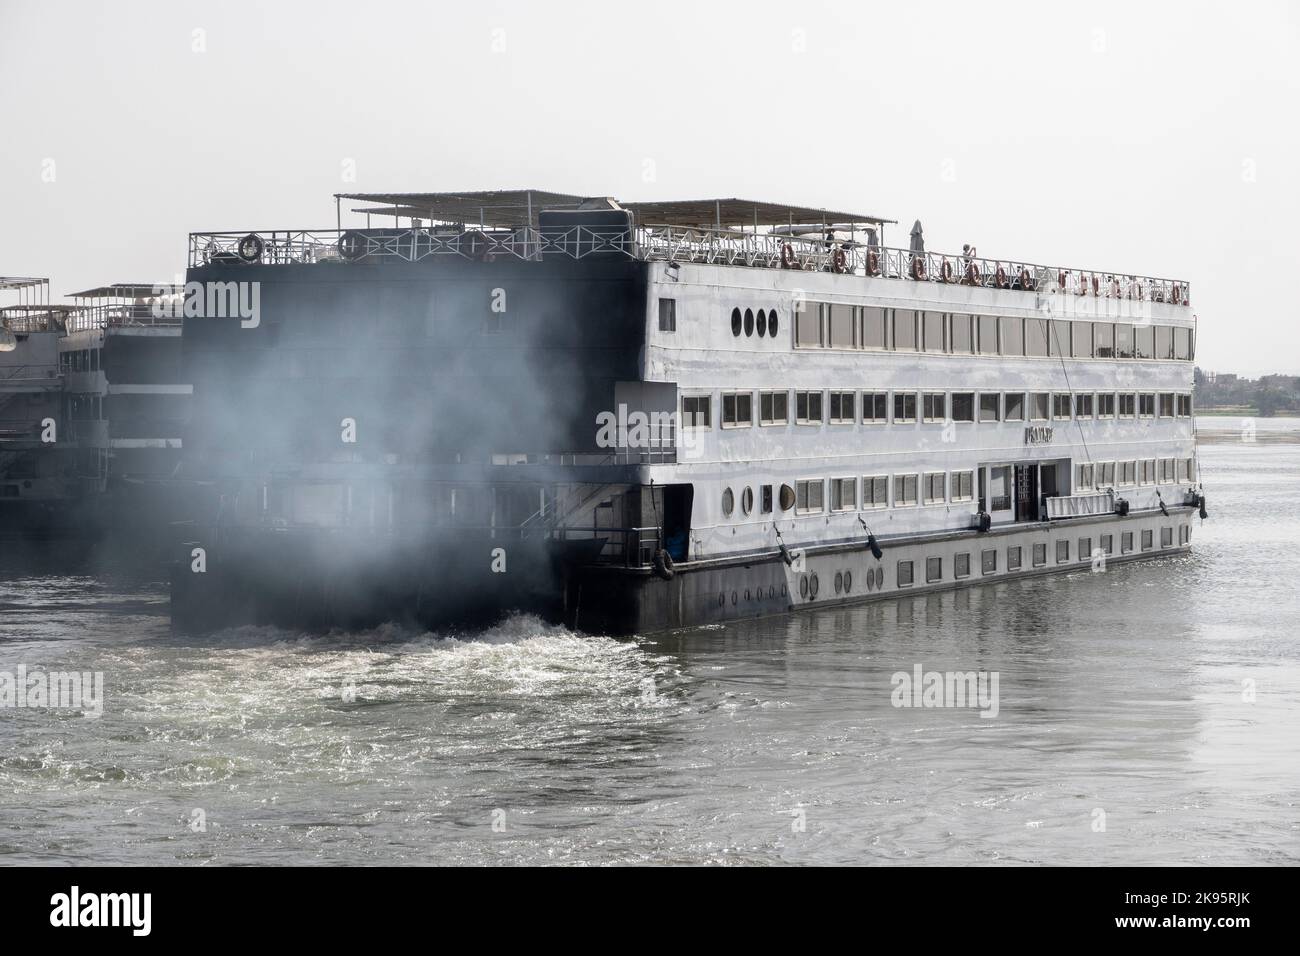 A moored Nile cruise boat pulling away from the dock in a haze of exhaust pollution Stock Photo